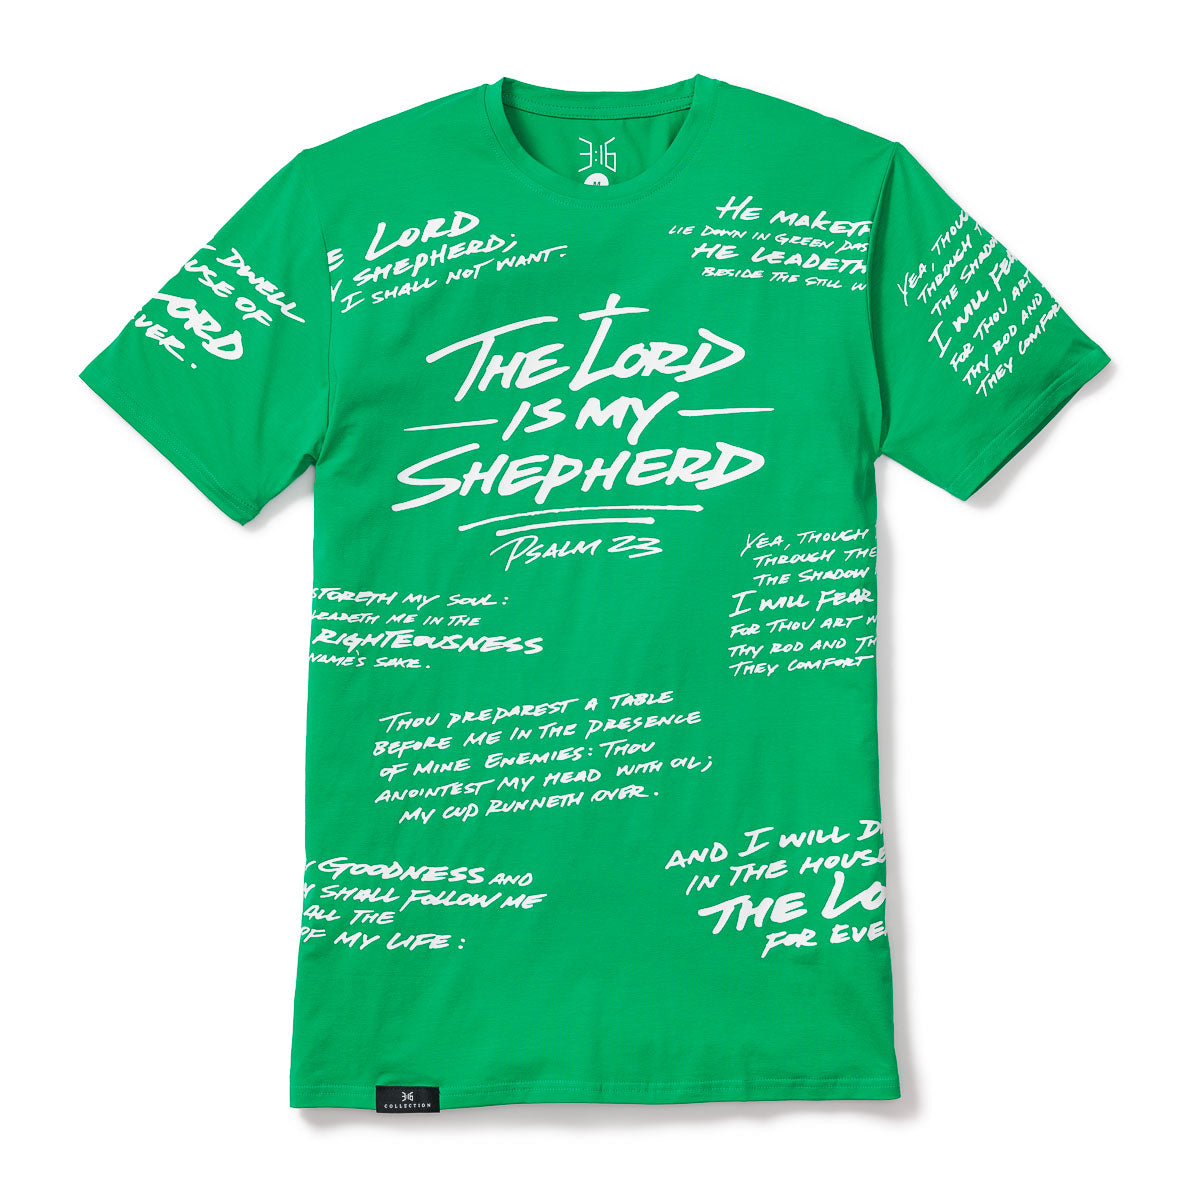 Psalm 23 - All Over Premium Tee - Limited Edition - Nigeria Green